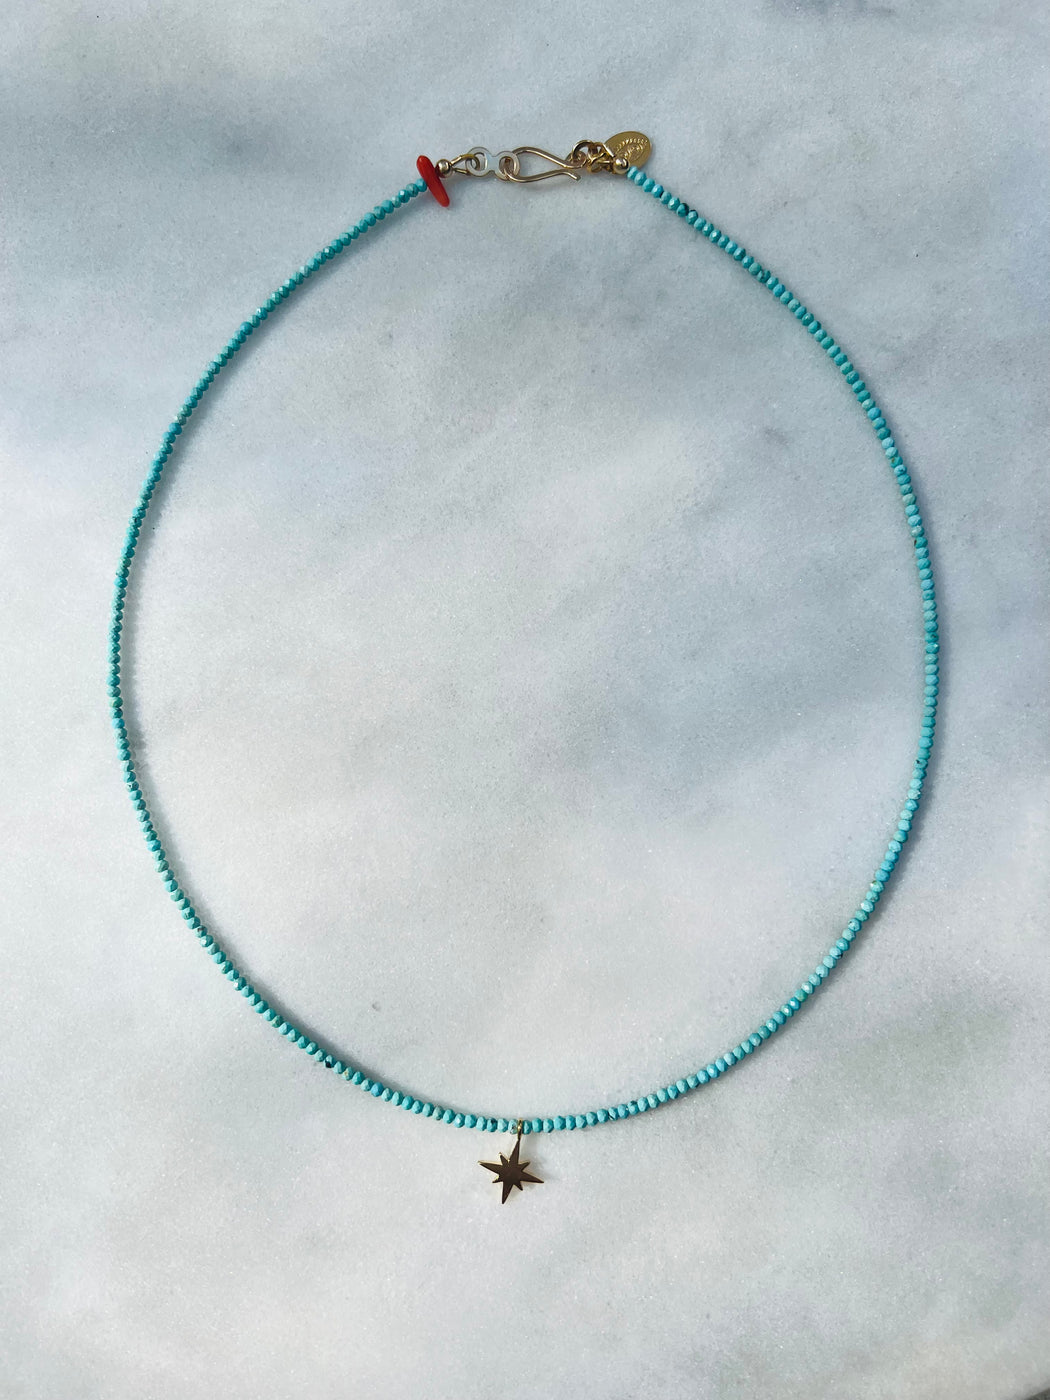 18" Turquoise strung on coated gold wire, accented with star charm and Coral, with Gold Vermeil clasp.  "Work. Play. Reason. Faith. Turquoise delivers on all of the above, empowering us to just let ourselves be human.  Turquoise can help translate the biggest feels into the right words in any language." Available at PUNKWASP